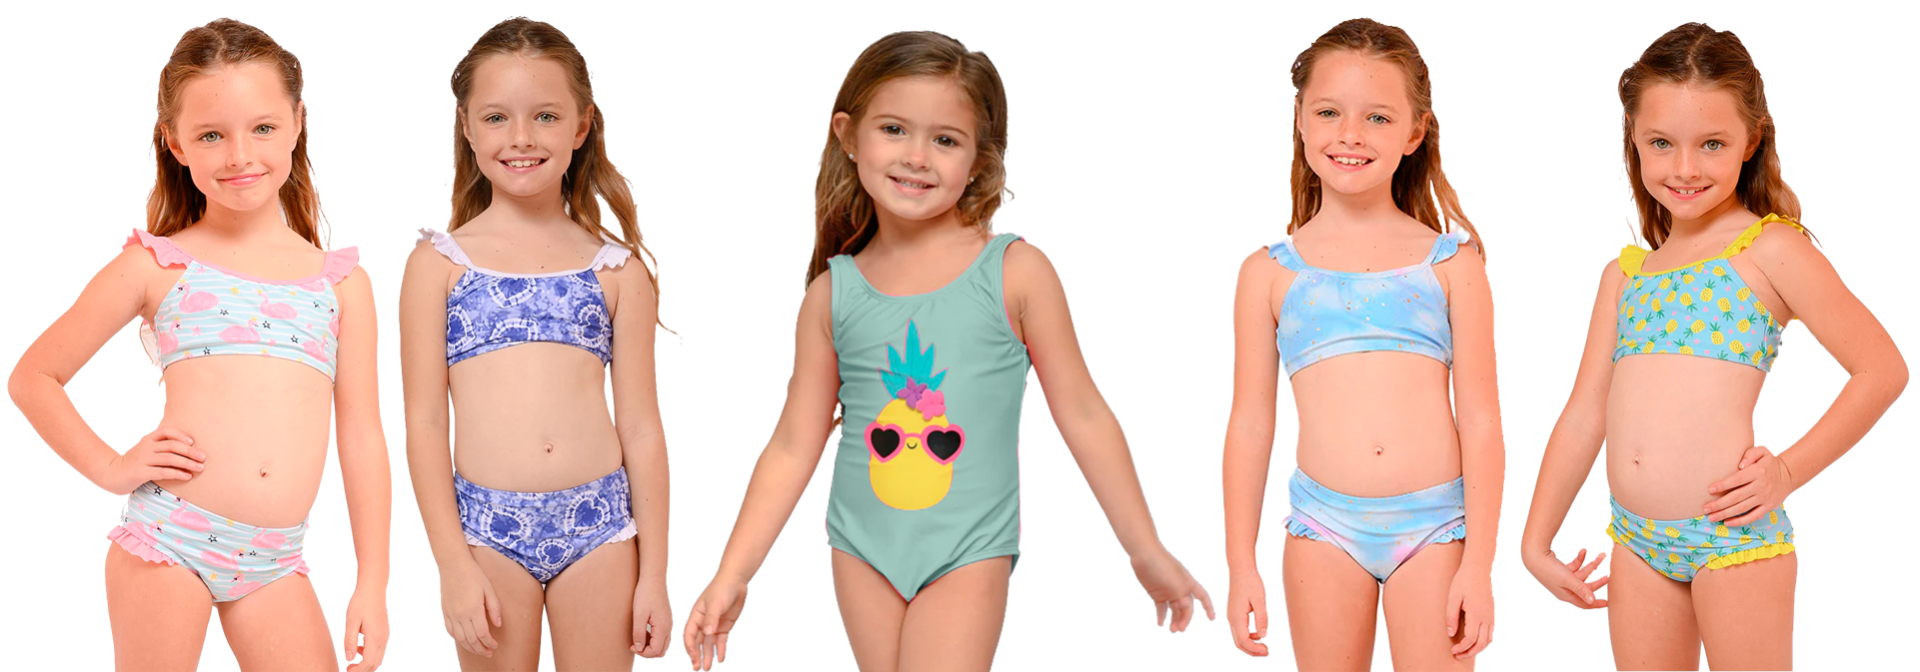 ''Little Girl's Two Tone One-Piece & Two-Piece Swimsuits  - Pineapple, FLAMINGO, & Heart Print - Size